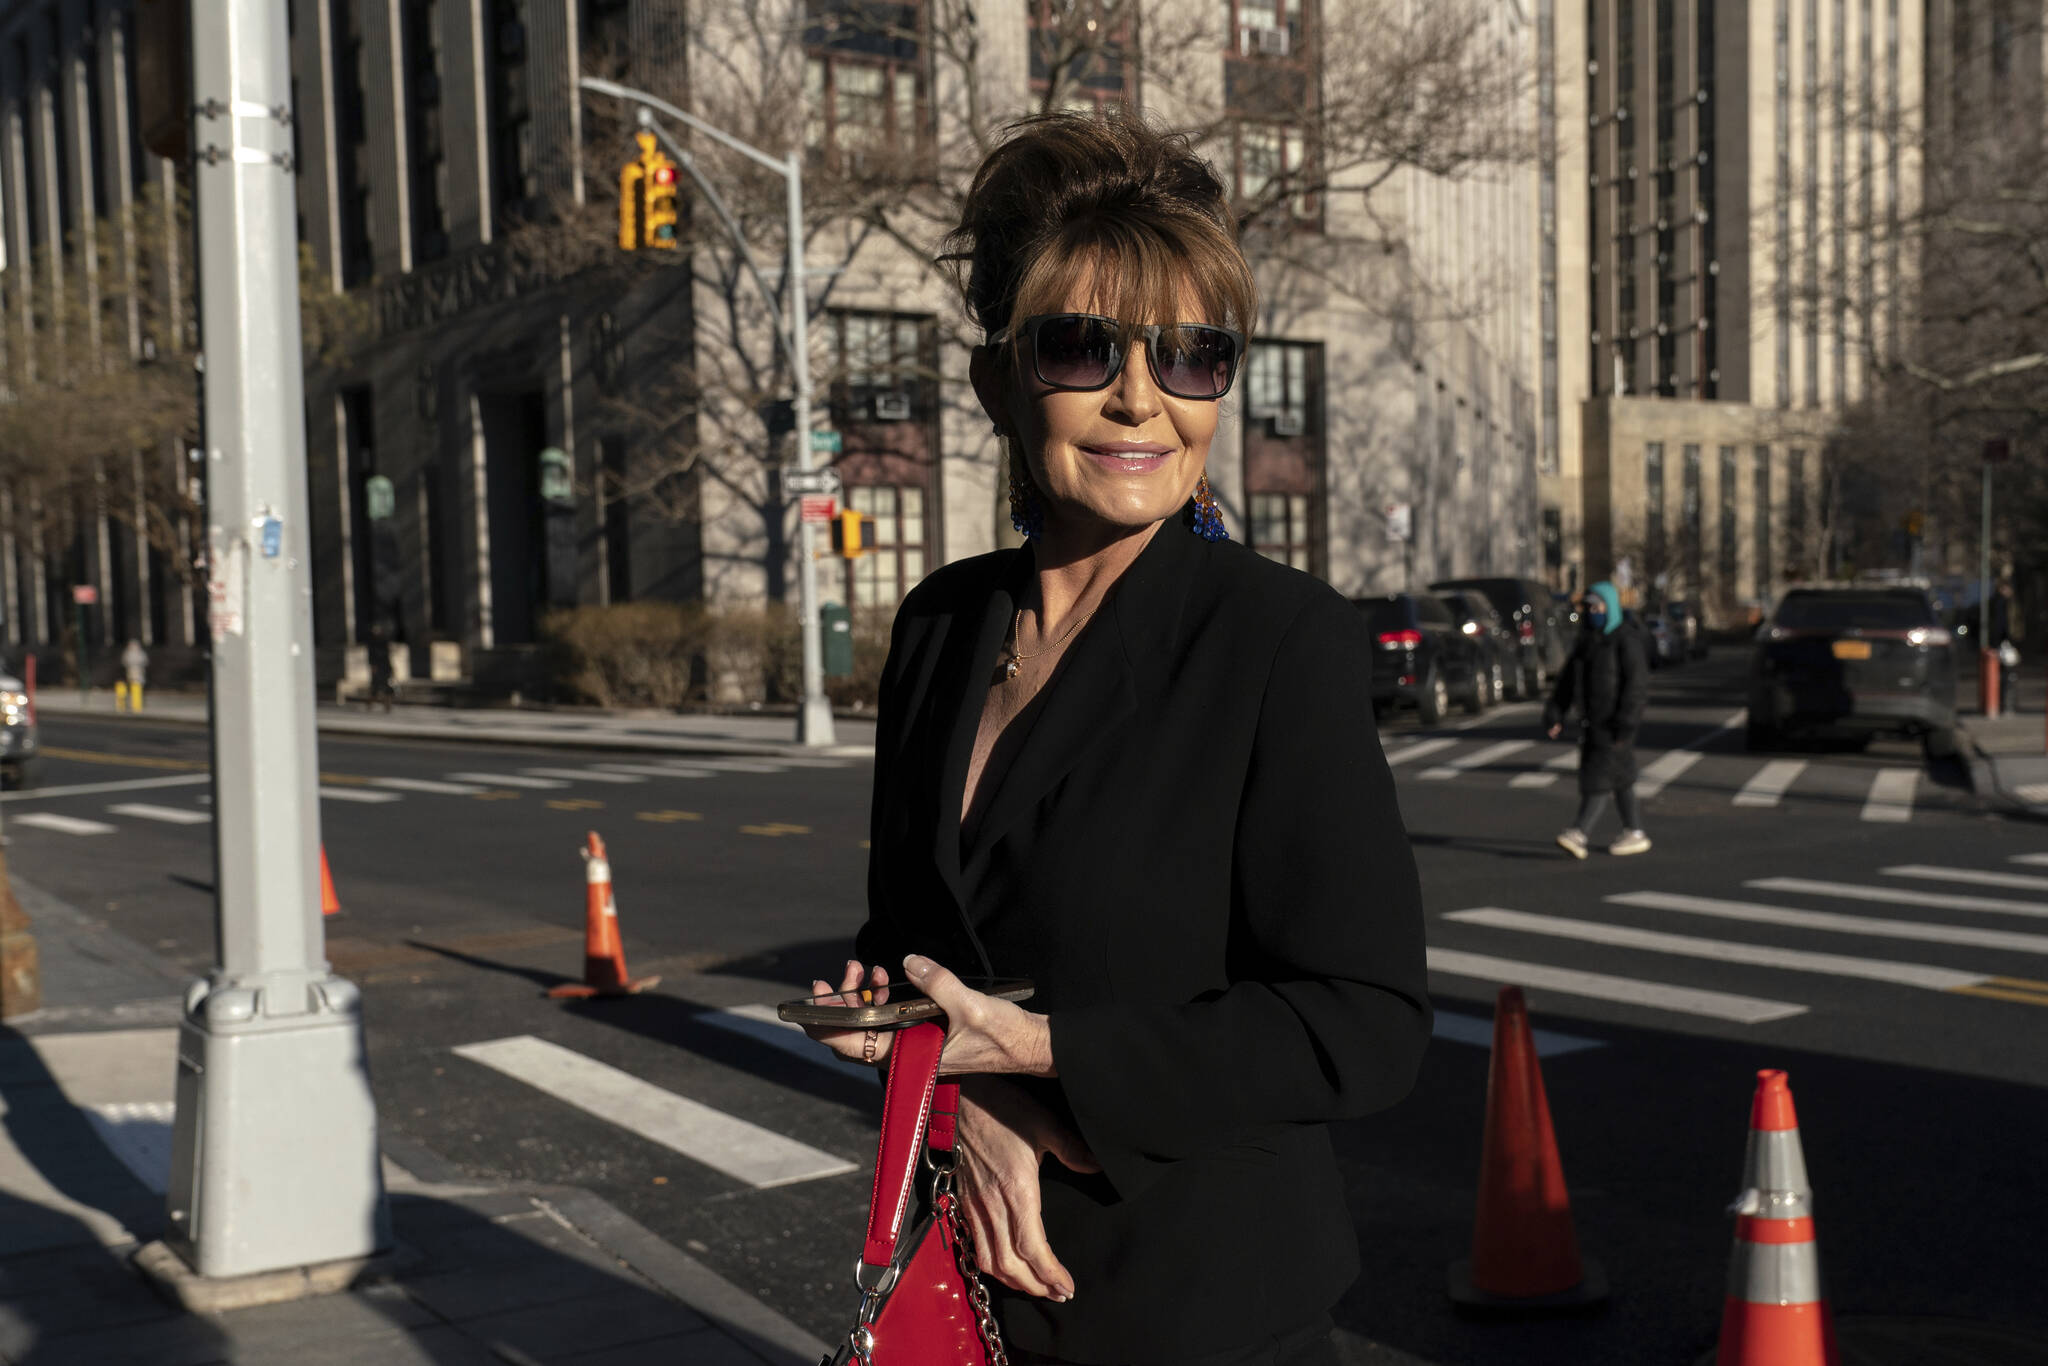 Former Alaska Gov. Sarah Palin arrives to Federal court in New York City on Friday, Feb. 11, 2022. Palin claims the New York Times damaged her reputation with an editorial linking her campaign rhetoric to a mass shooting. (AP Photo / Jeenah Moon)